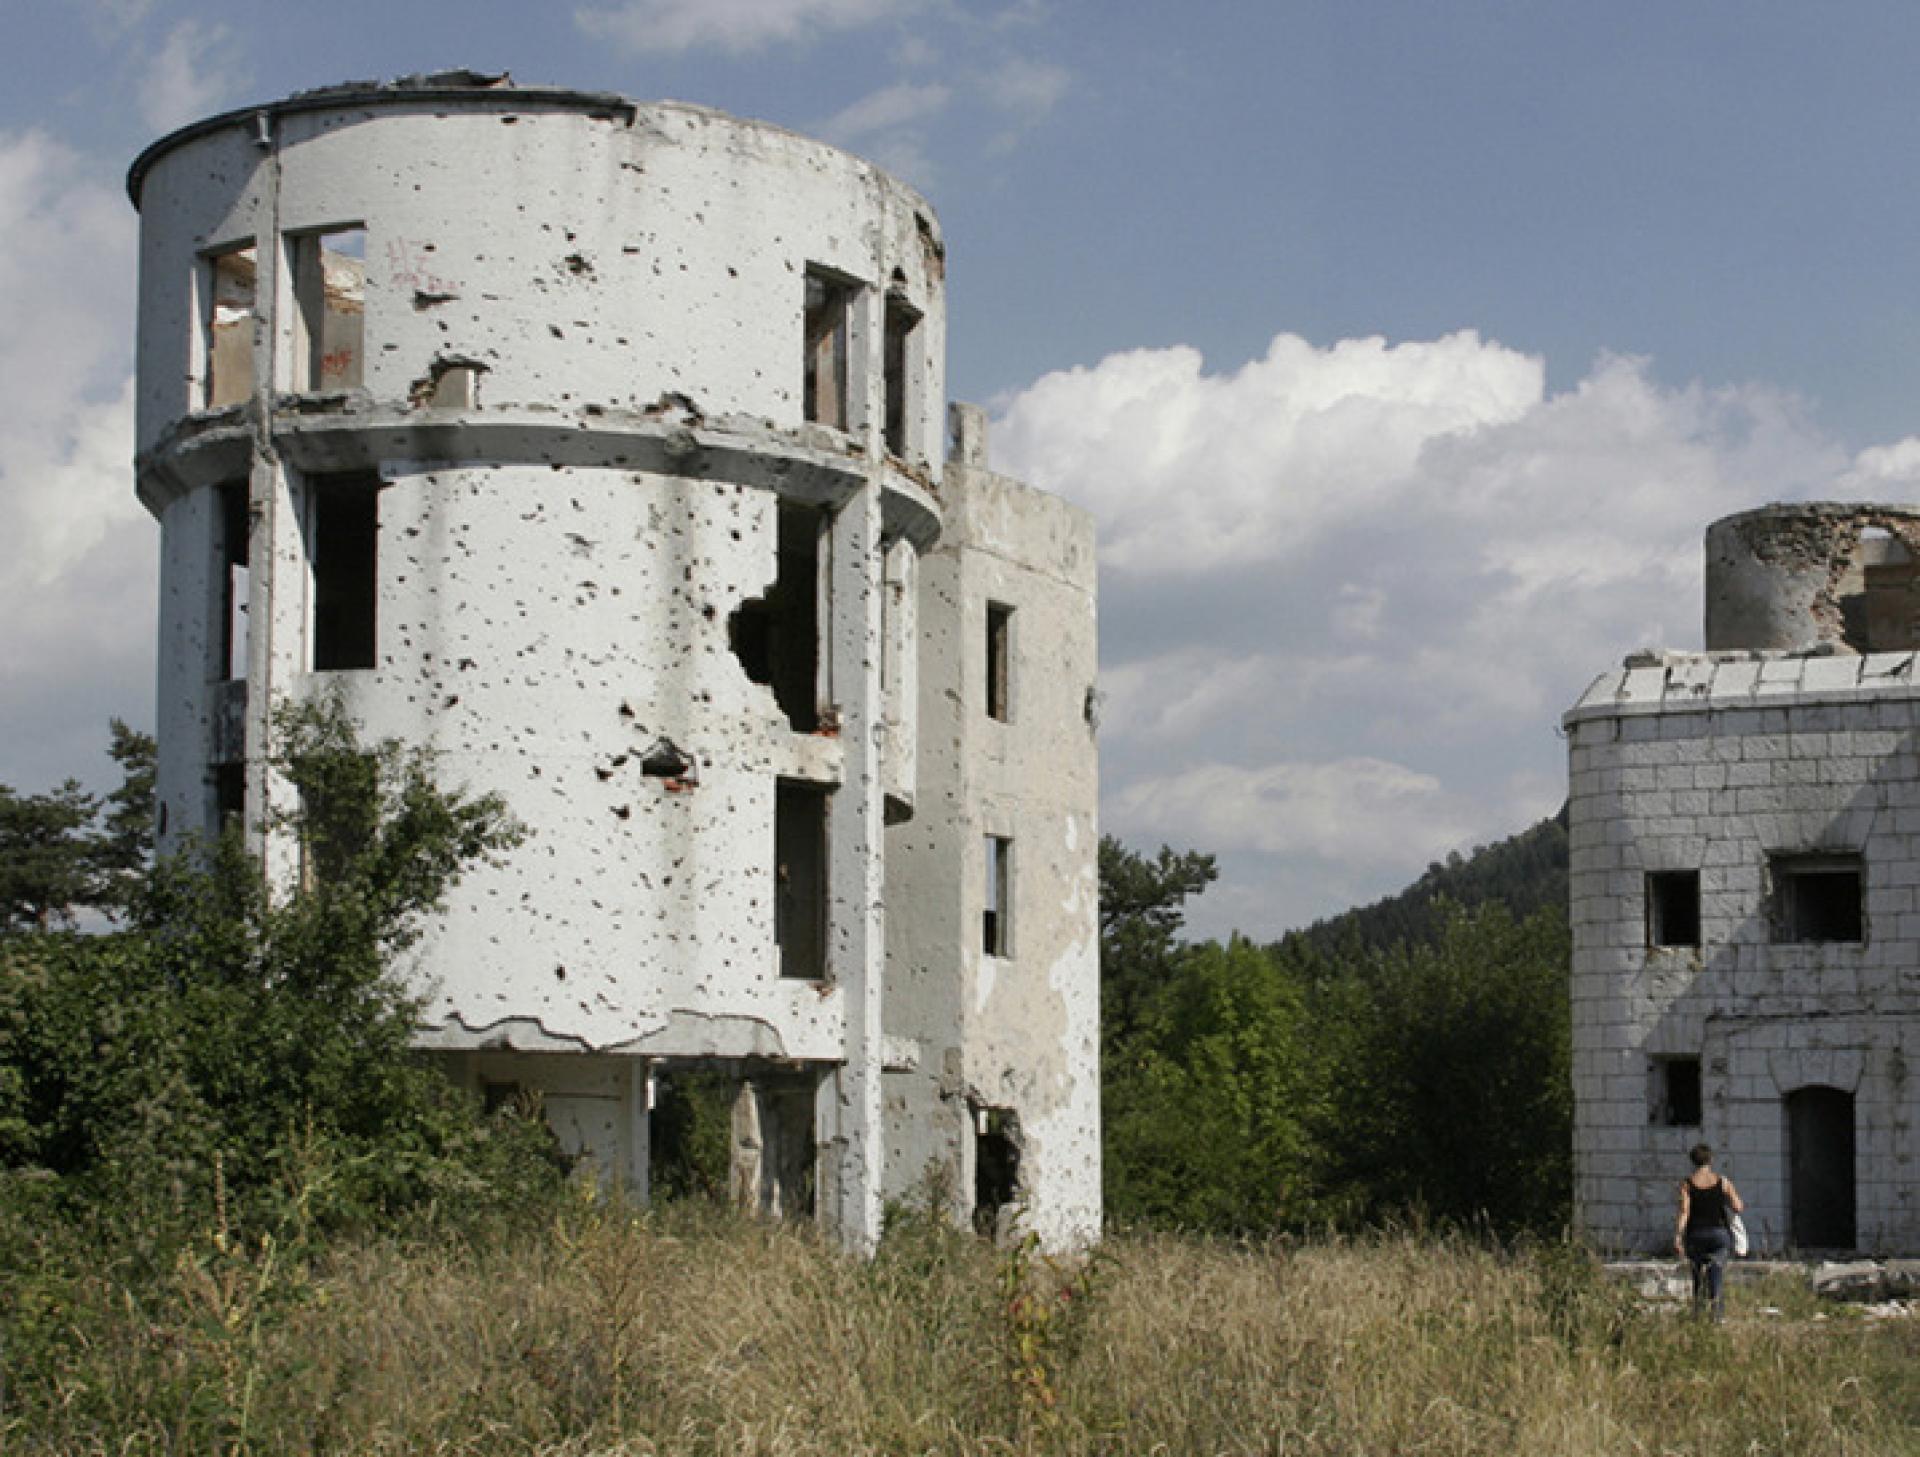 Destroyed building of the former Maršal Tito barracks and observatory building on the Trebević mountain. | Photo © Zoran Kanlić (2012)